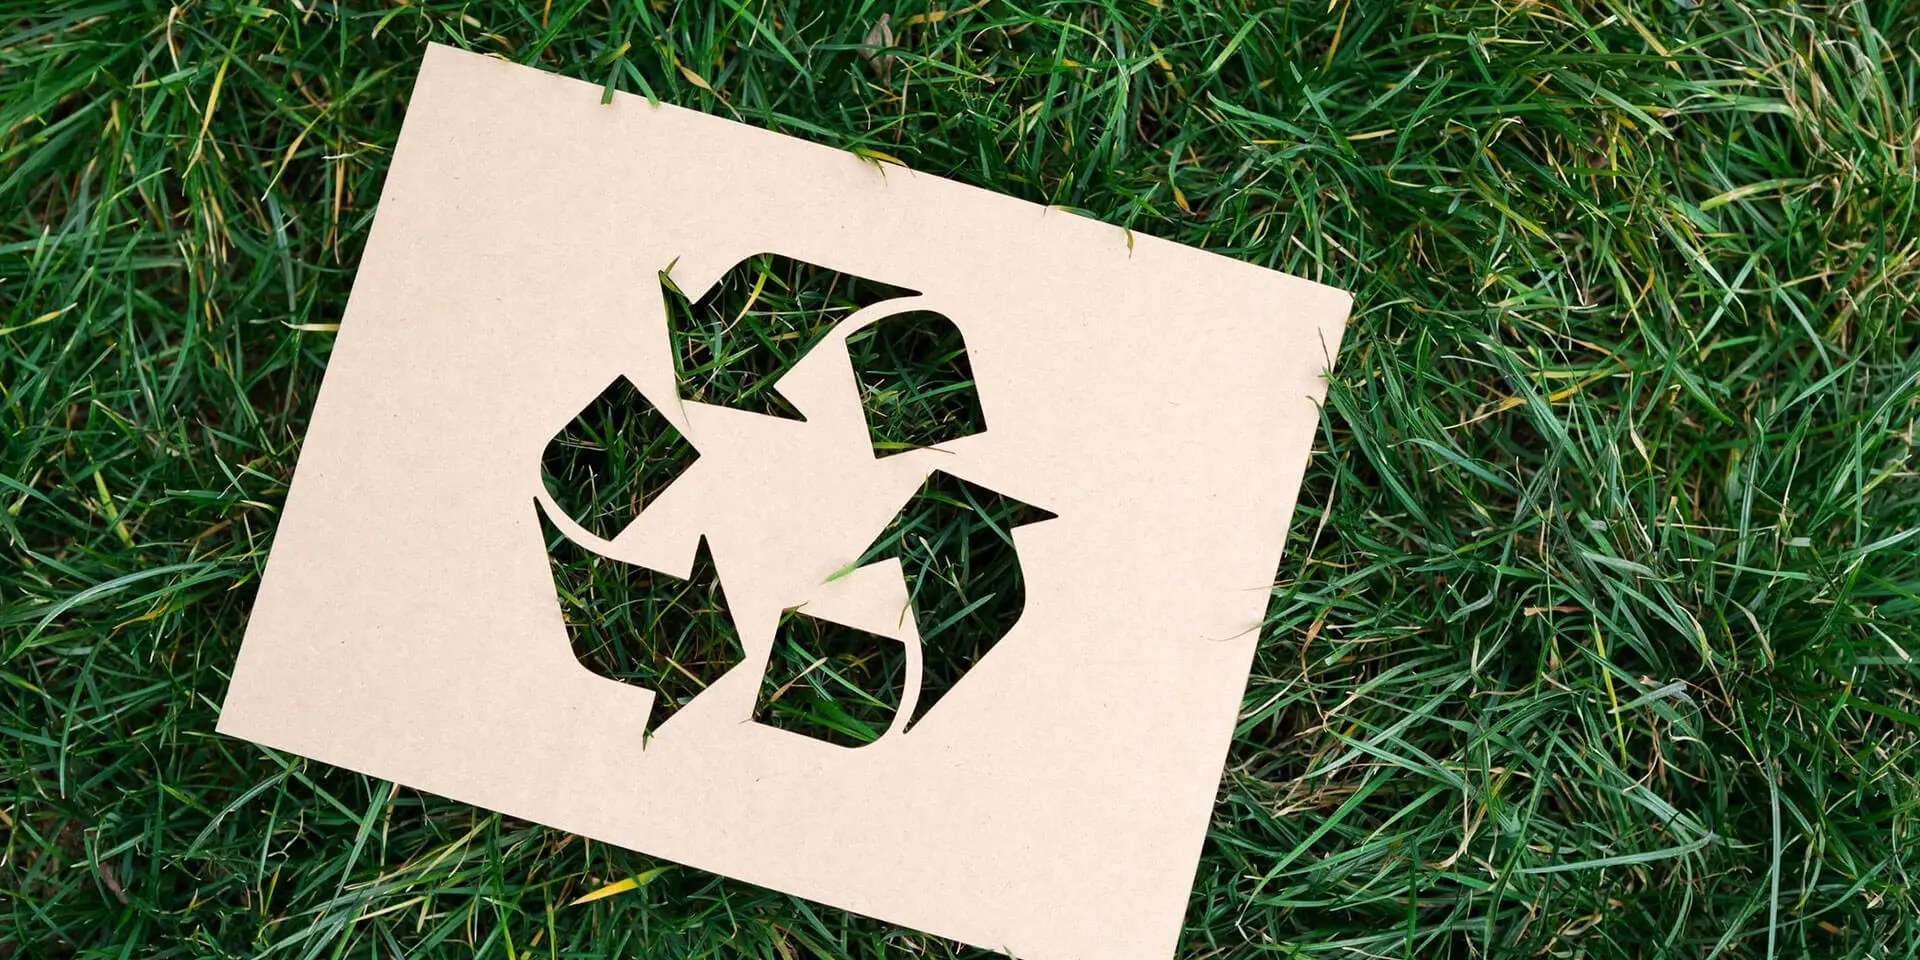 A cardboard cut out of the recycling symbol on grass.